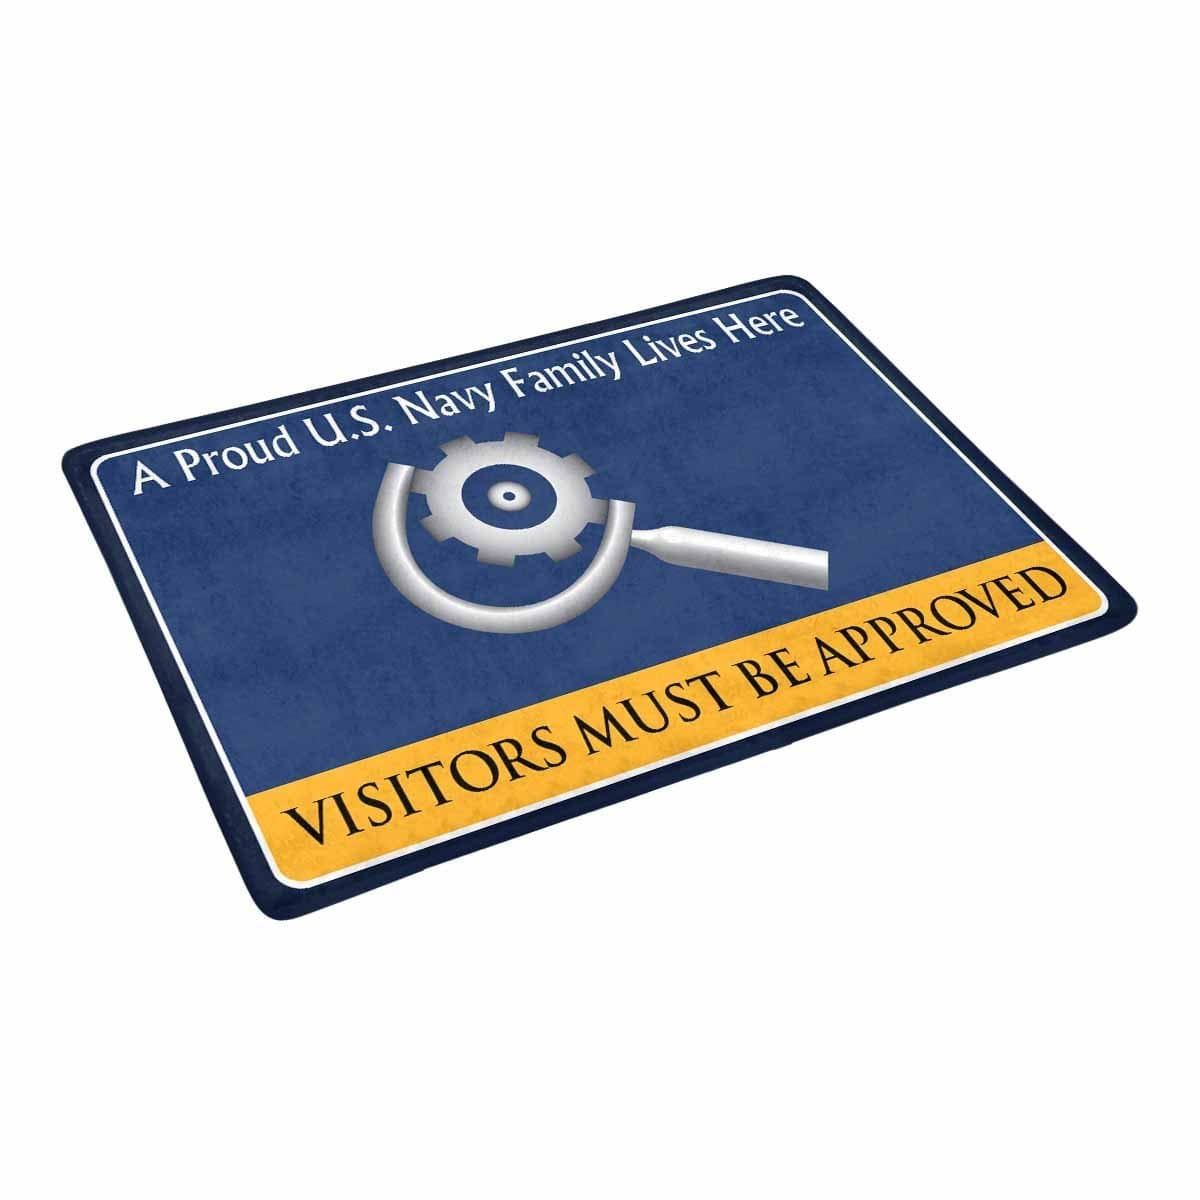 U.S Navy Machinery repairman Navy MR Family Doormat - Visitors must be approved (23,6 inches x 15,7 inches)-Doormat-Navy-Rate-Veterans Nation